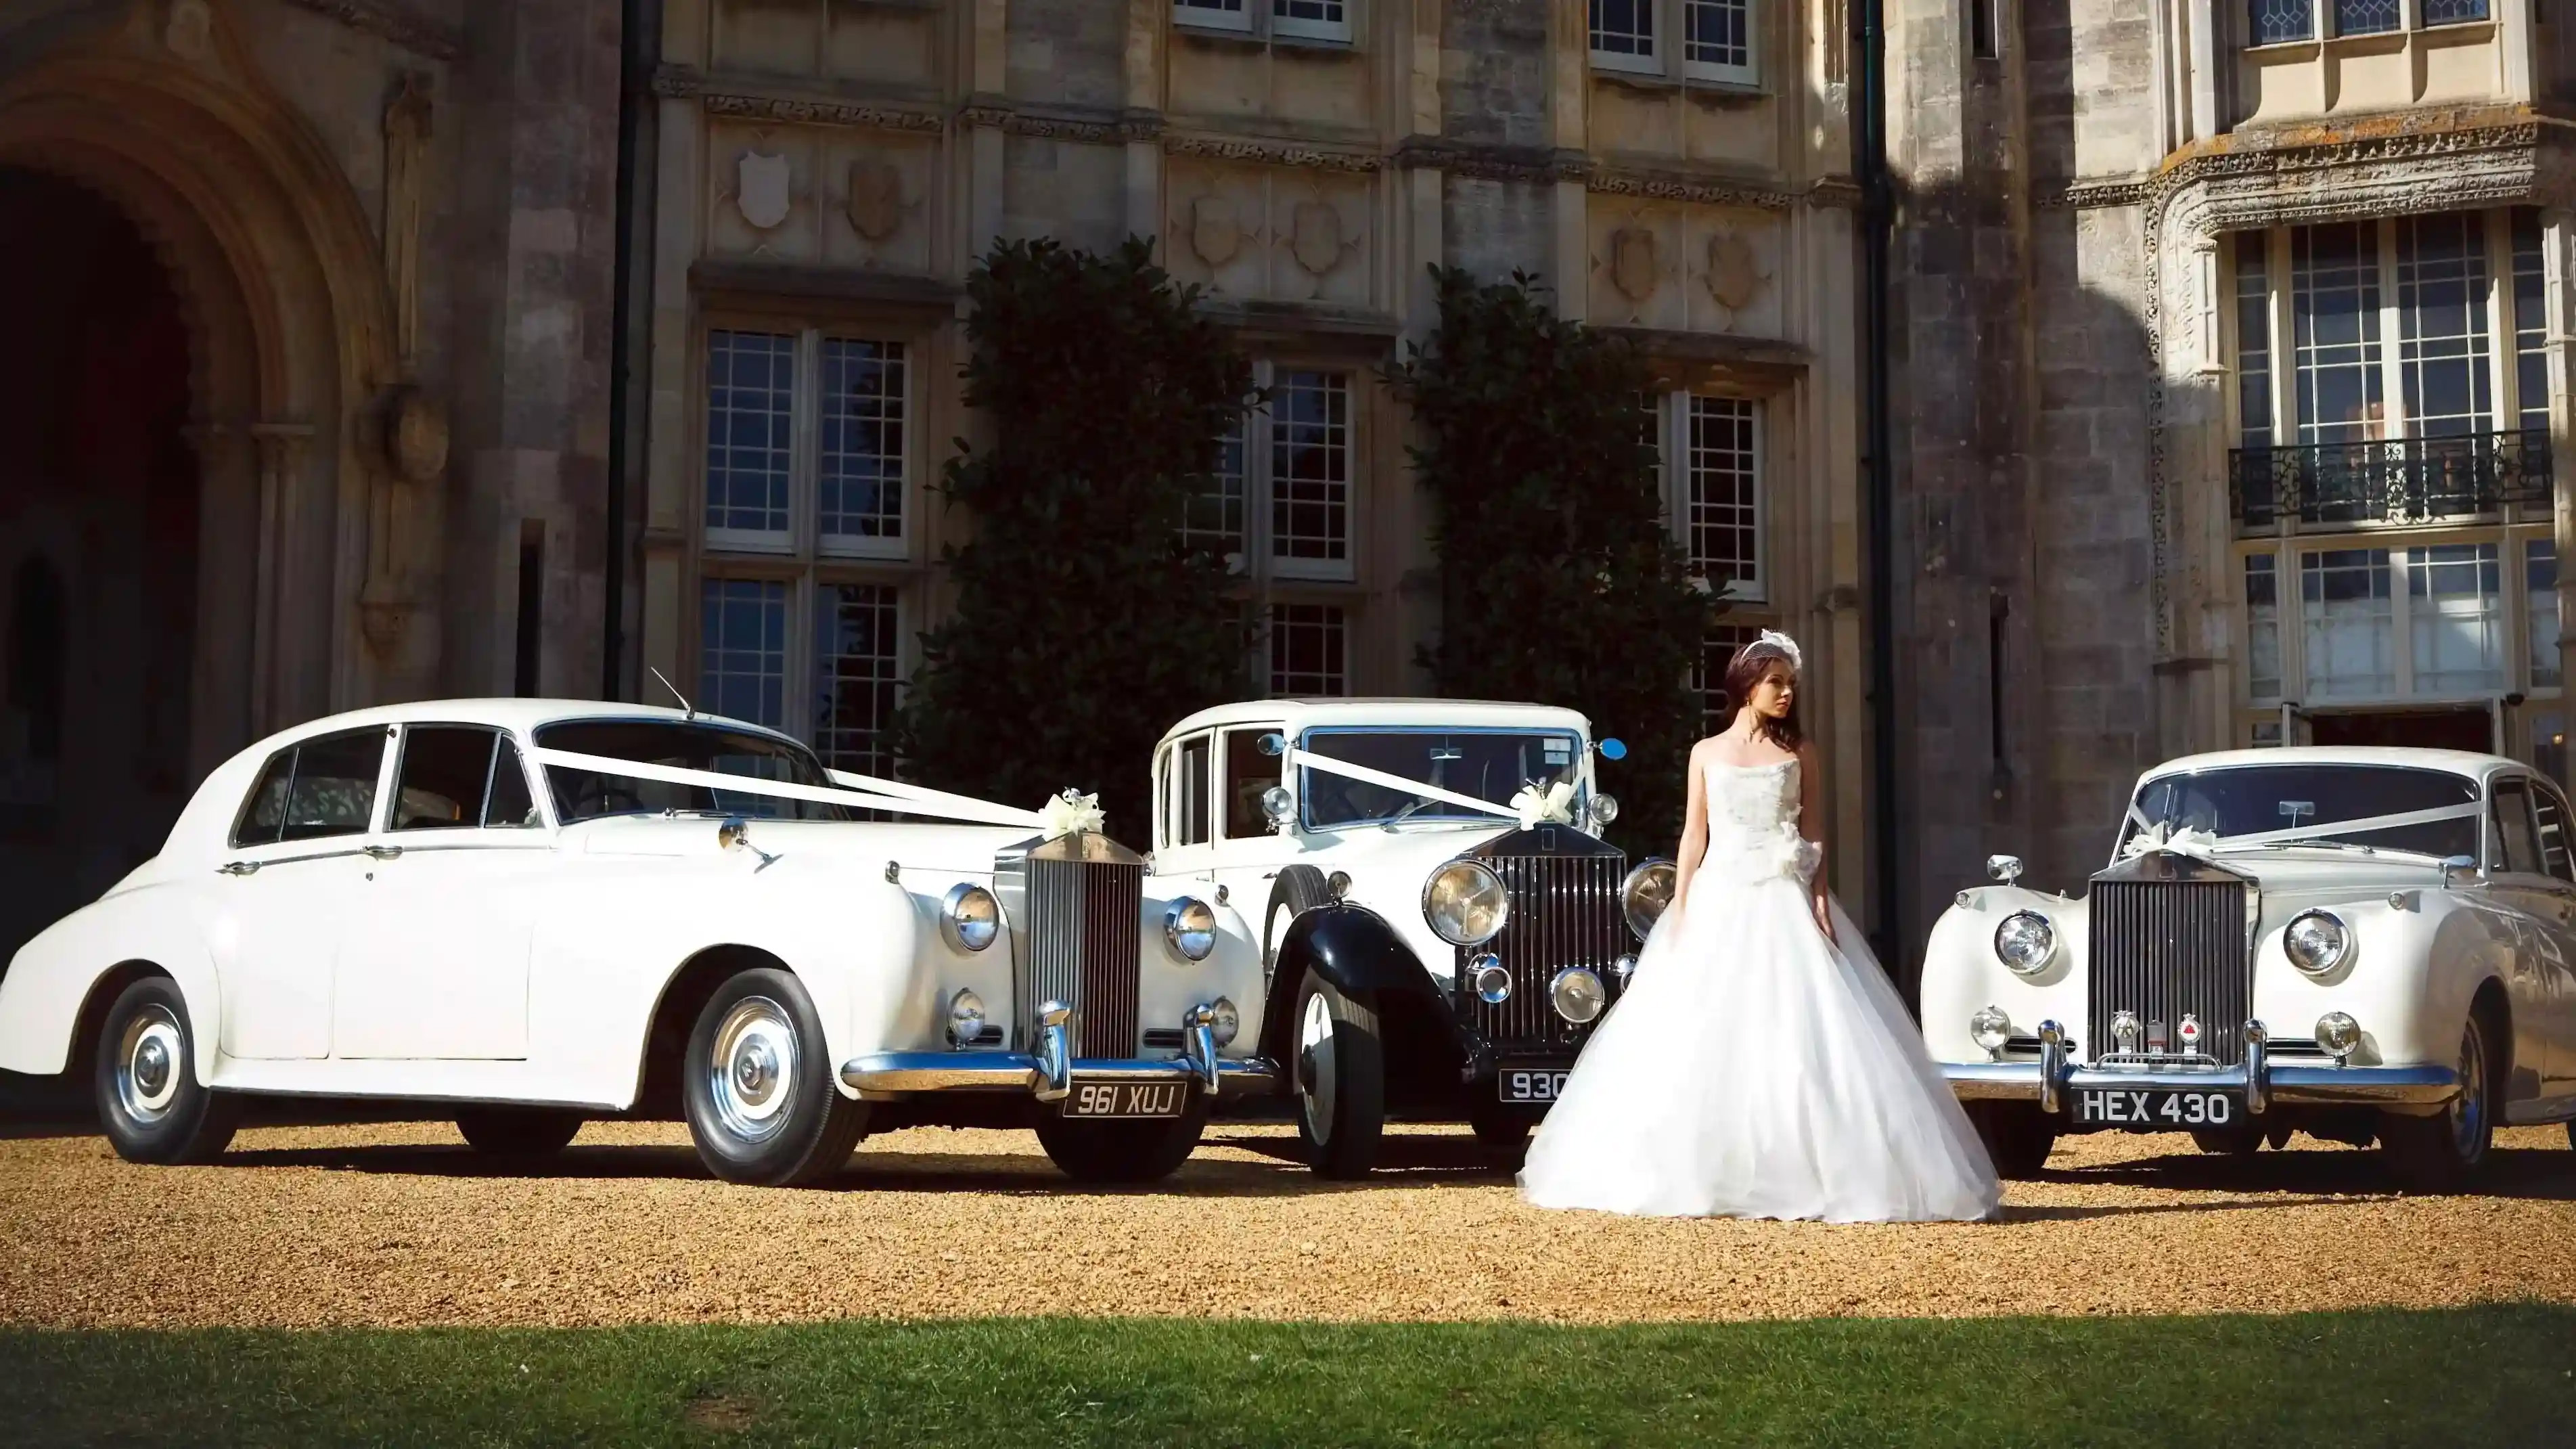 Selection of three classic and Vintage Rolls-Royce in White with Bride wearing a white wedding dress standing in the middle of the vehicles. Background is a popular wedding venue in the style of a castle in Hertfordshire.